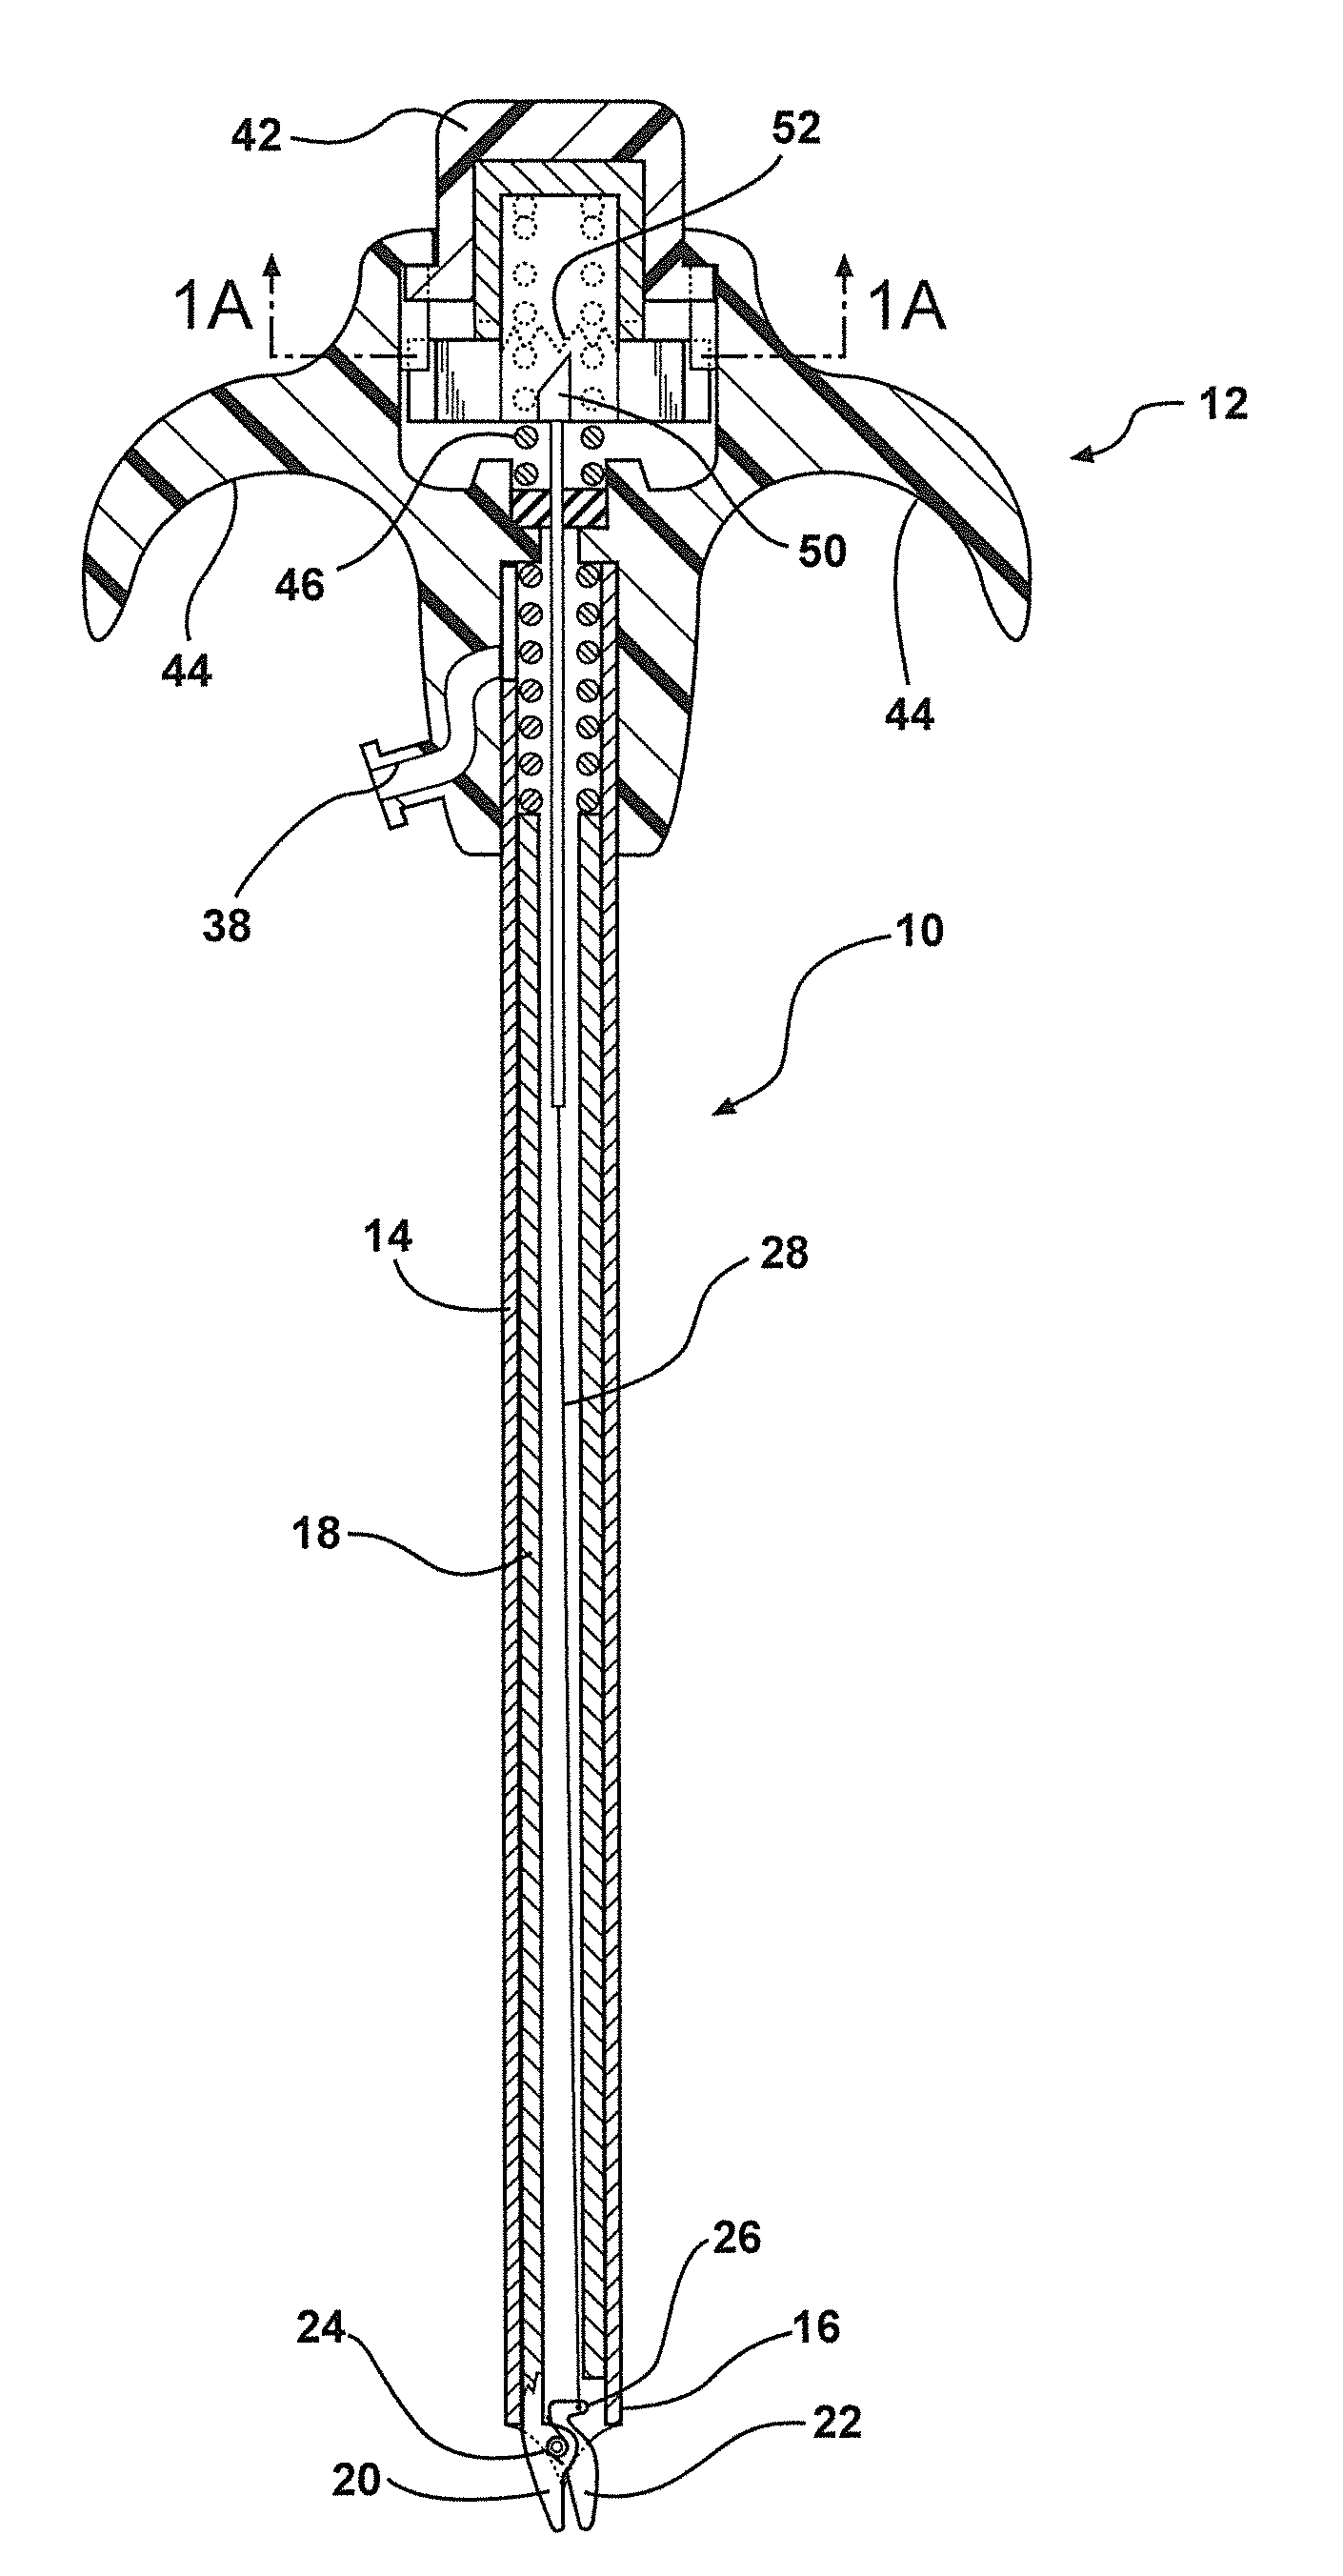 Veress needle with illuminated guidance and suturing capability